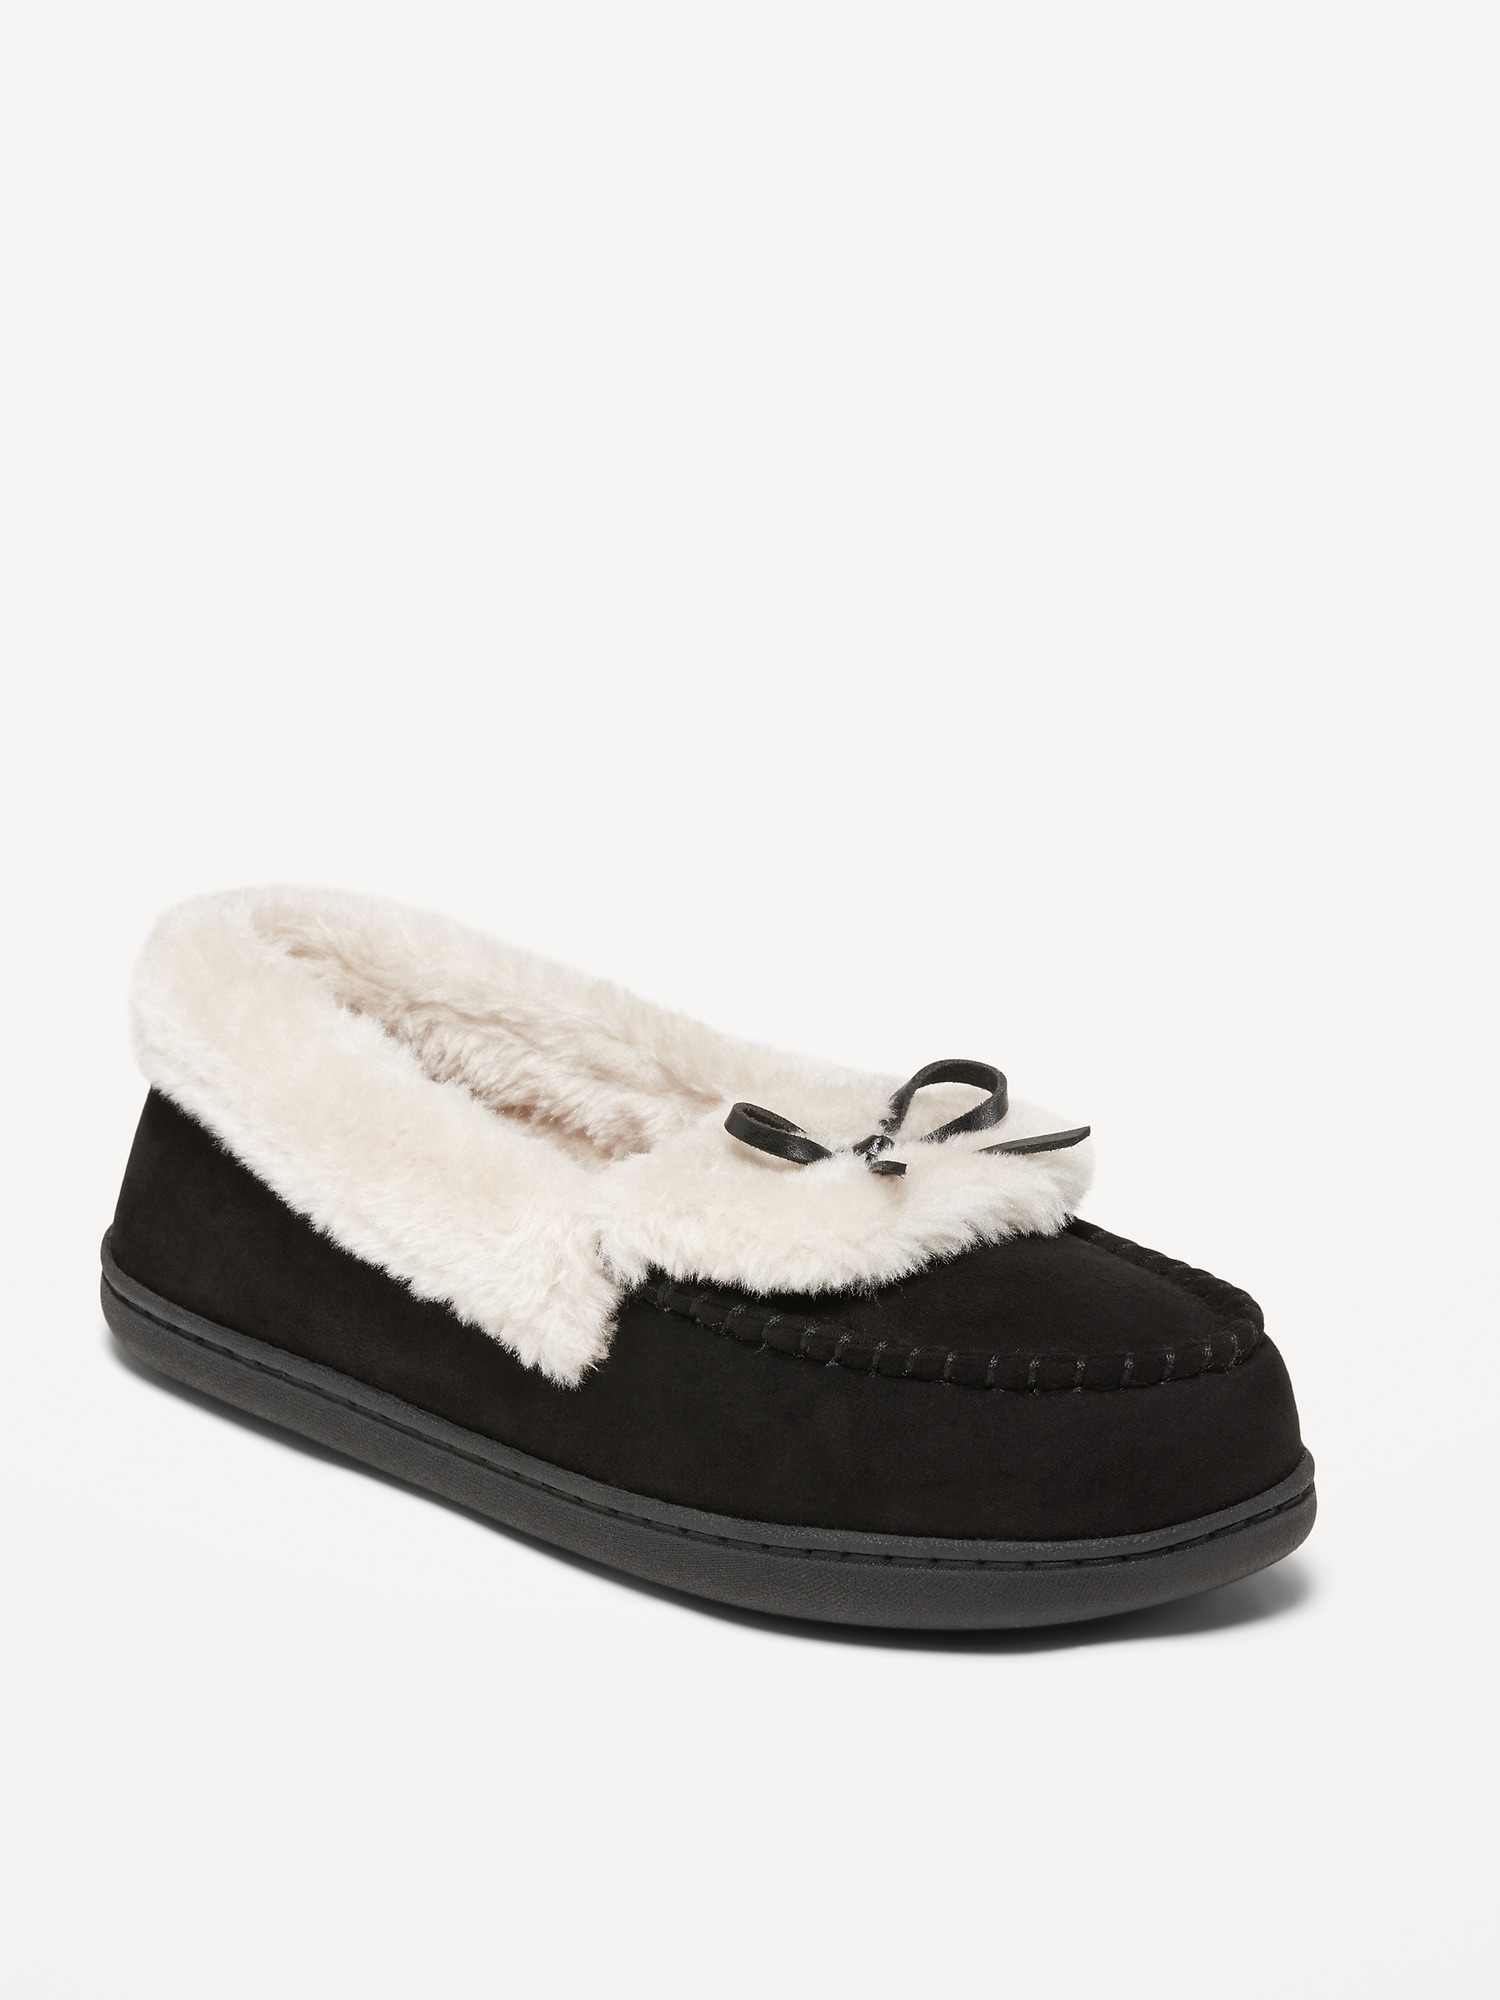 Faux-Suede Moccasin Slippers for Women